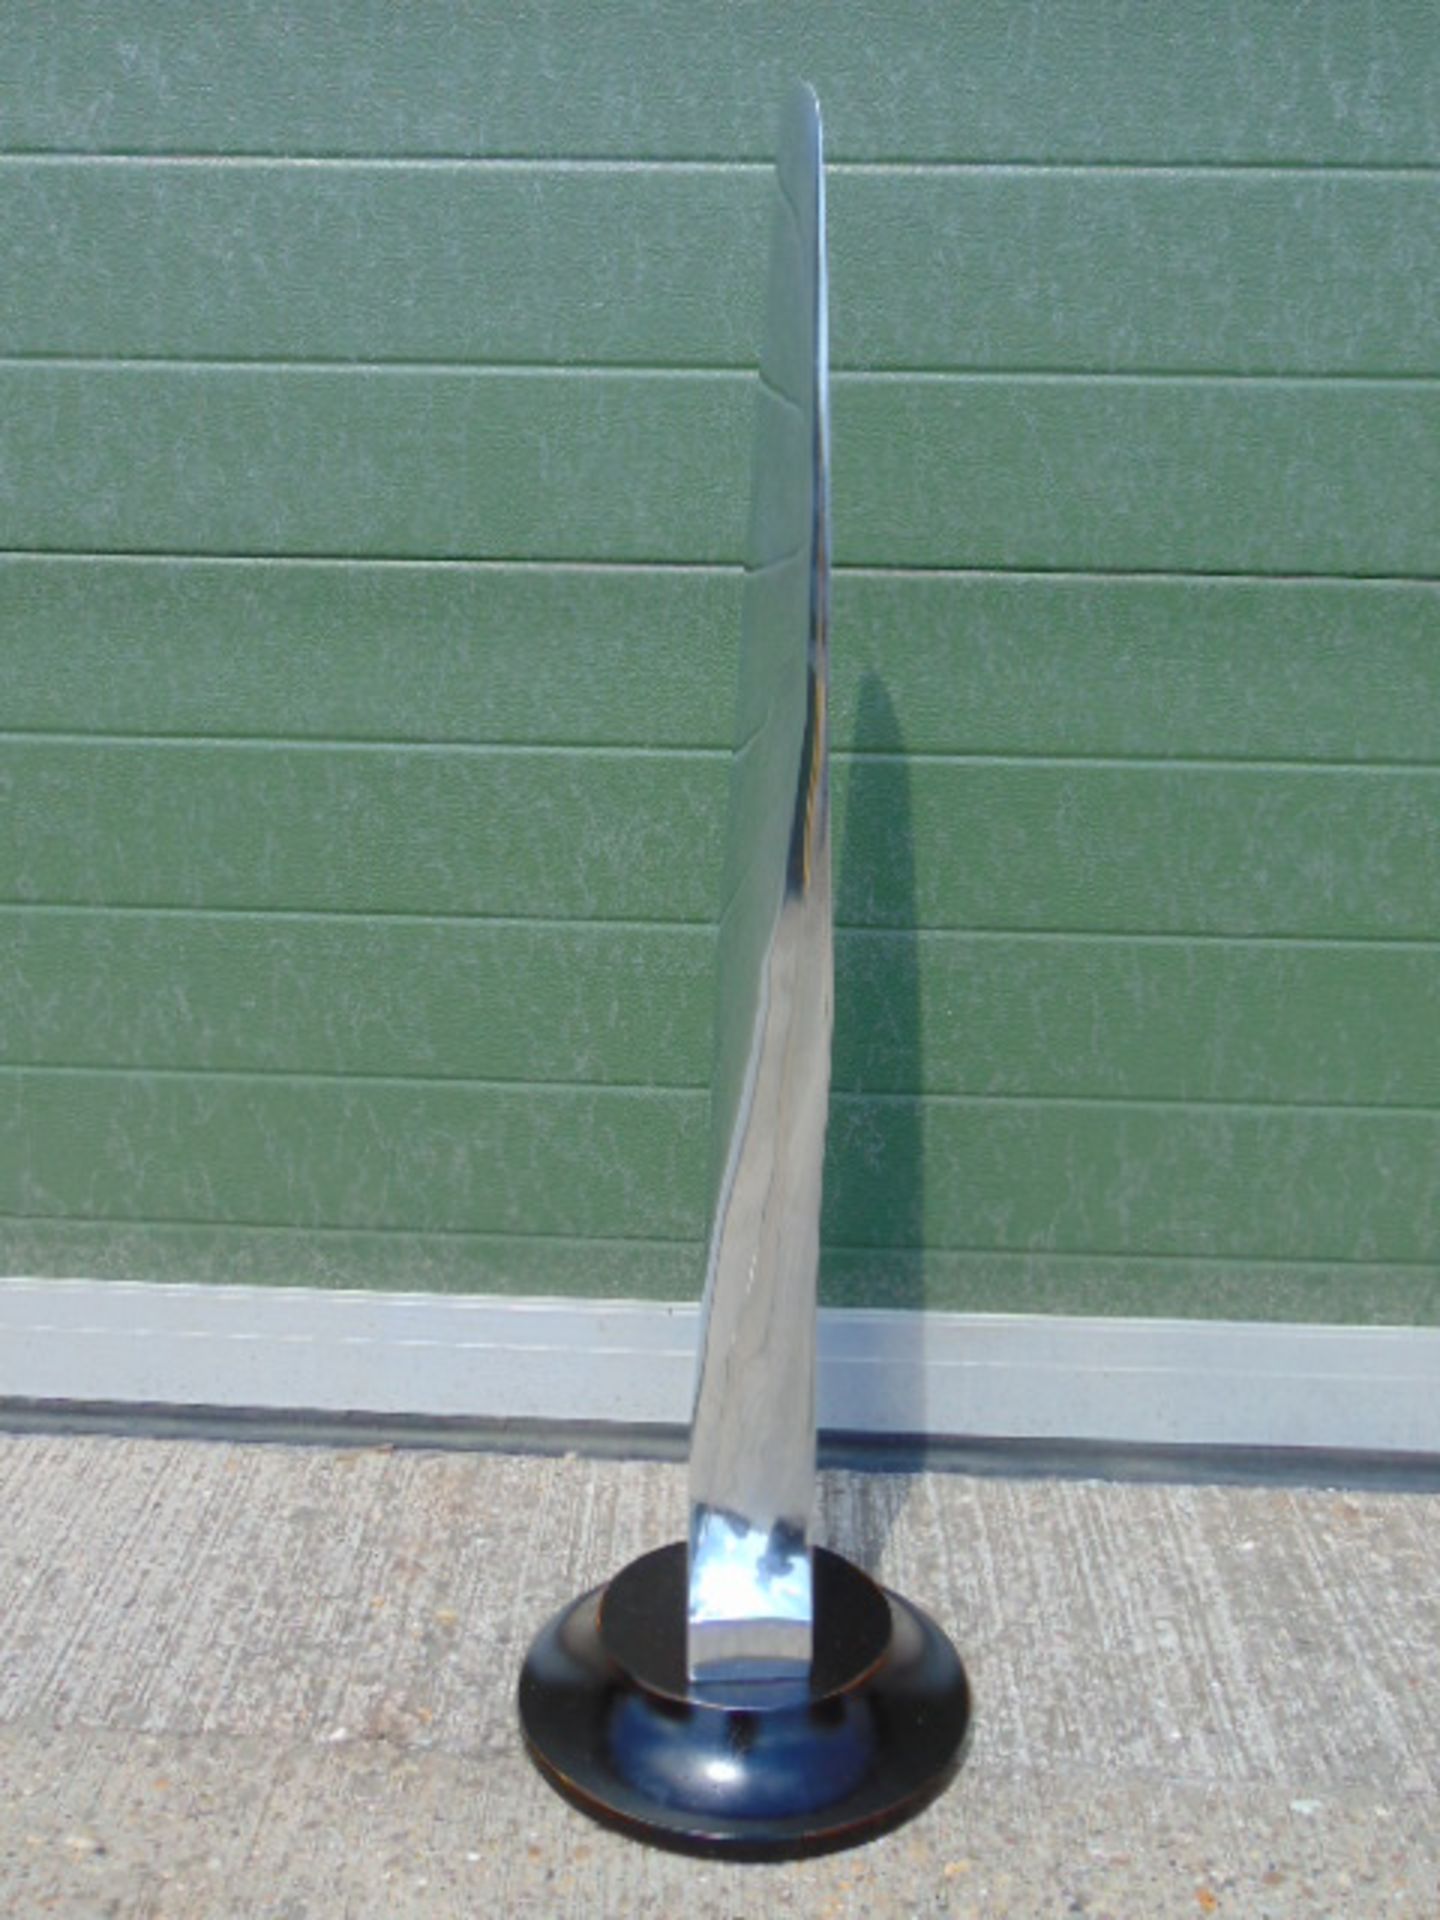 Polished Aluminium Propeller Blade on Stand - Image 2 of 6